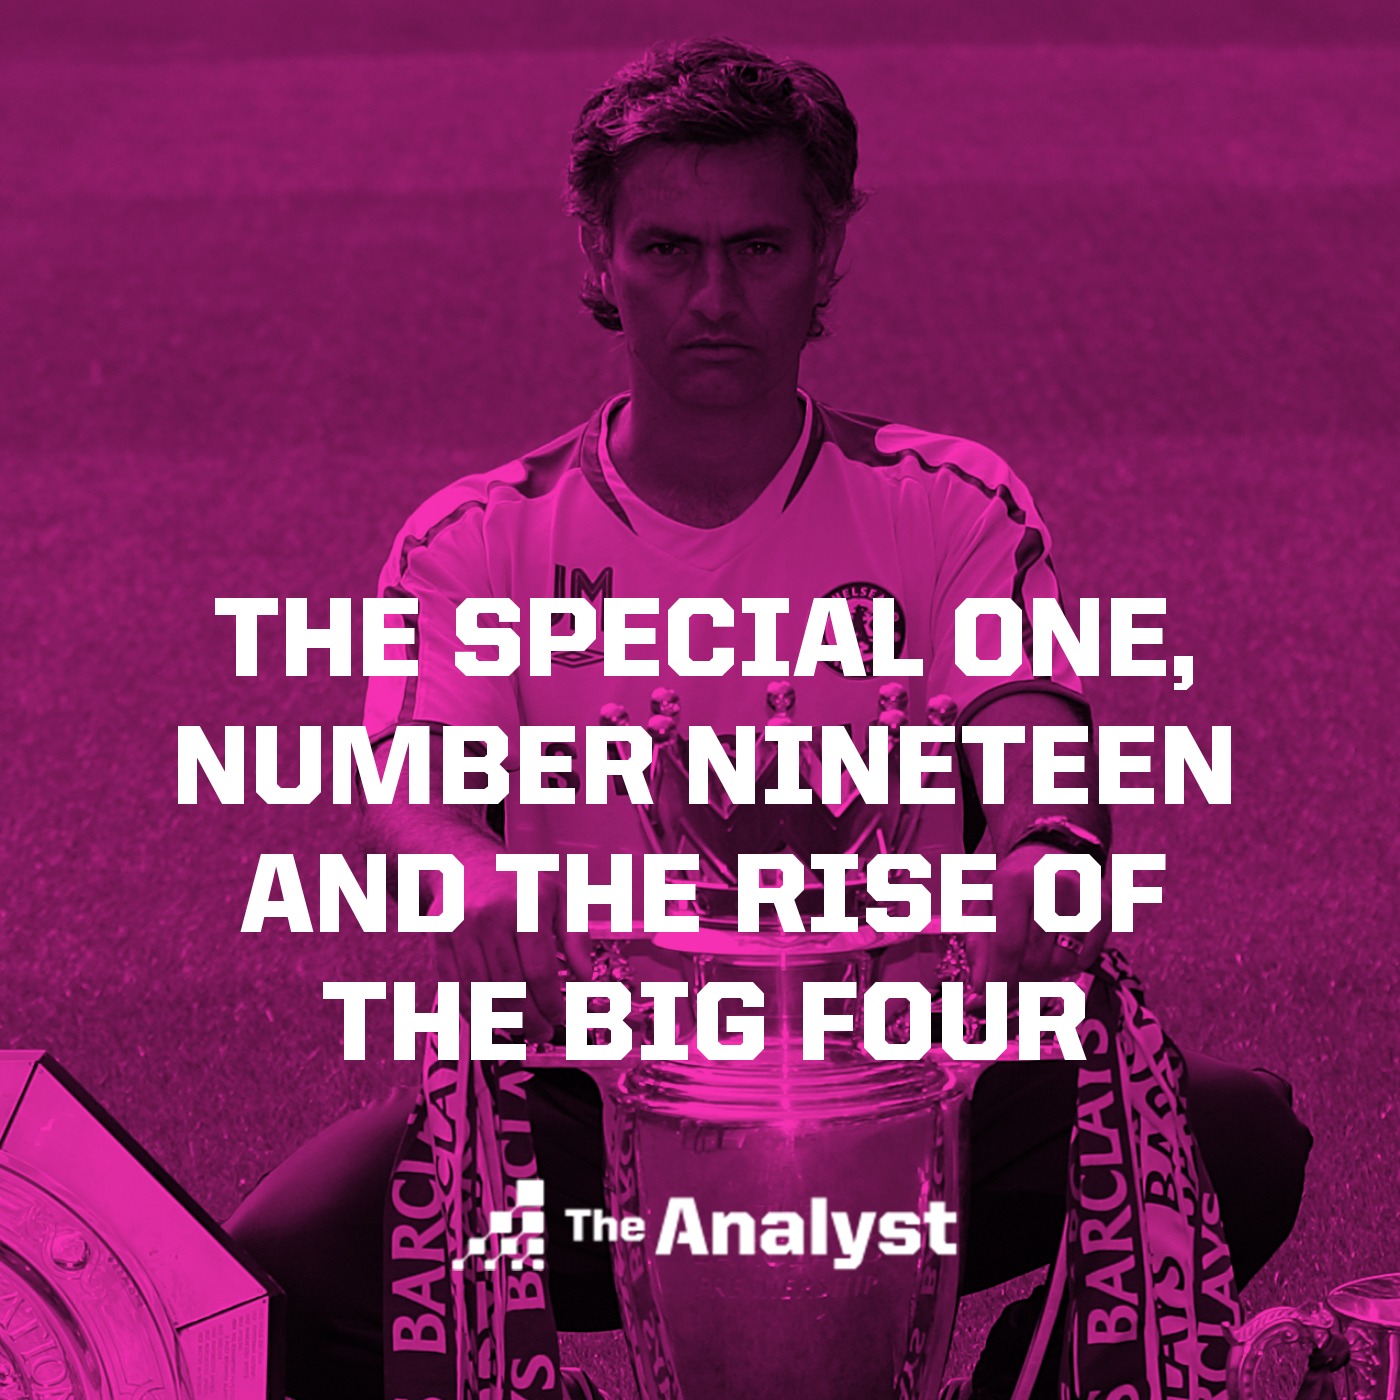 Premier League Seasons Part III: The Special One, Number Nineteen and the Rise of the Big Four